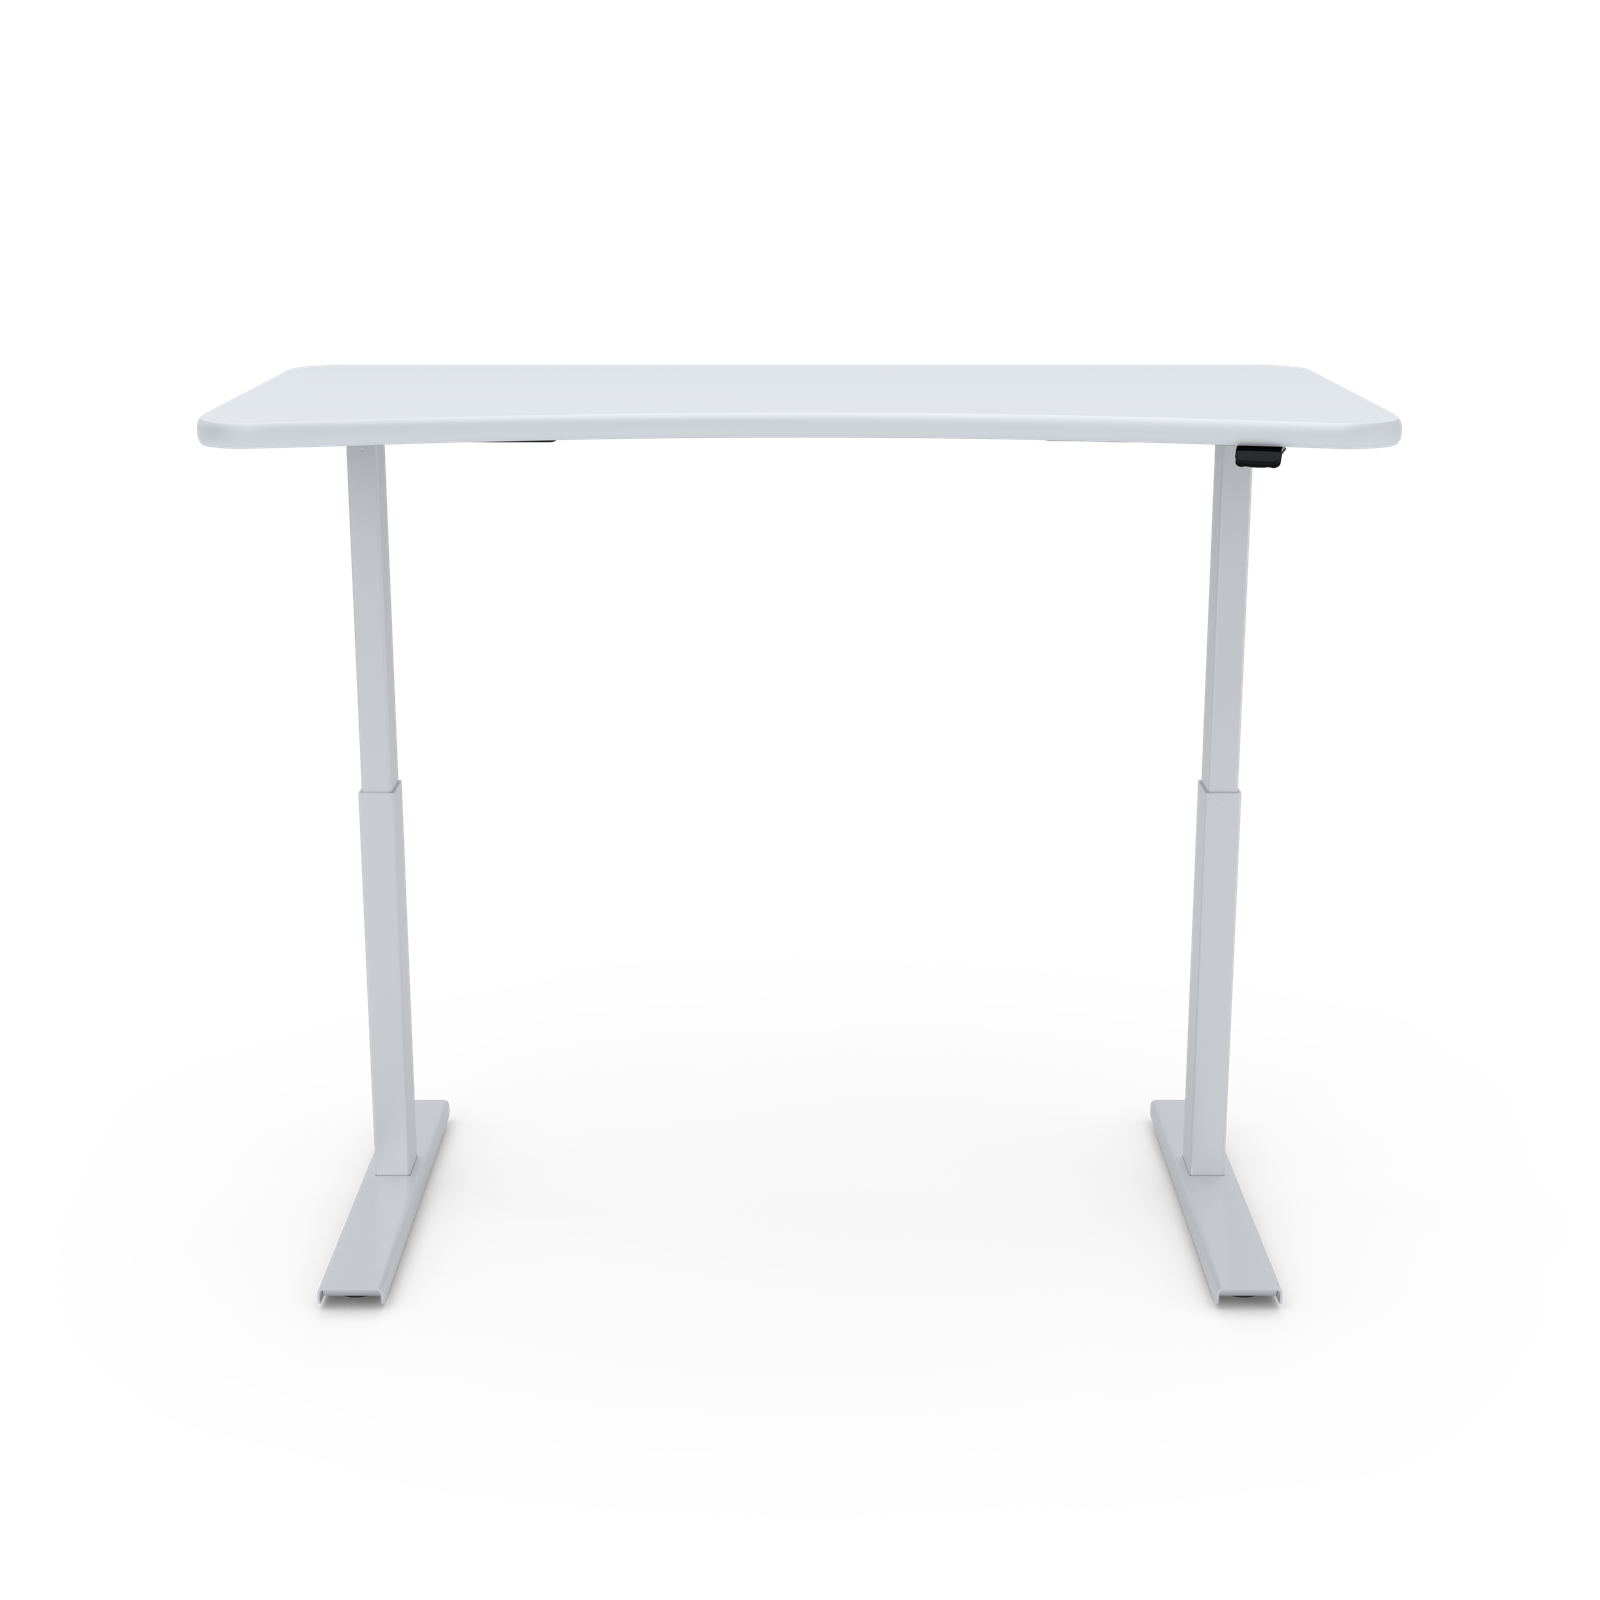 Black And White Desk PNG - 137967